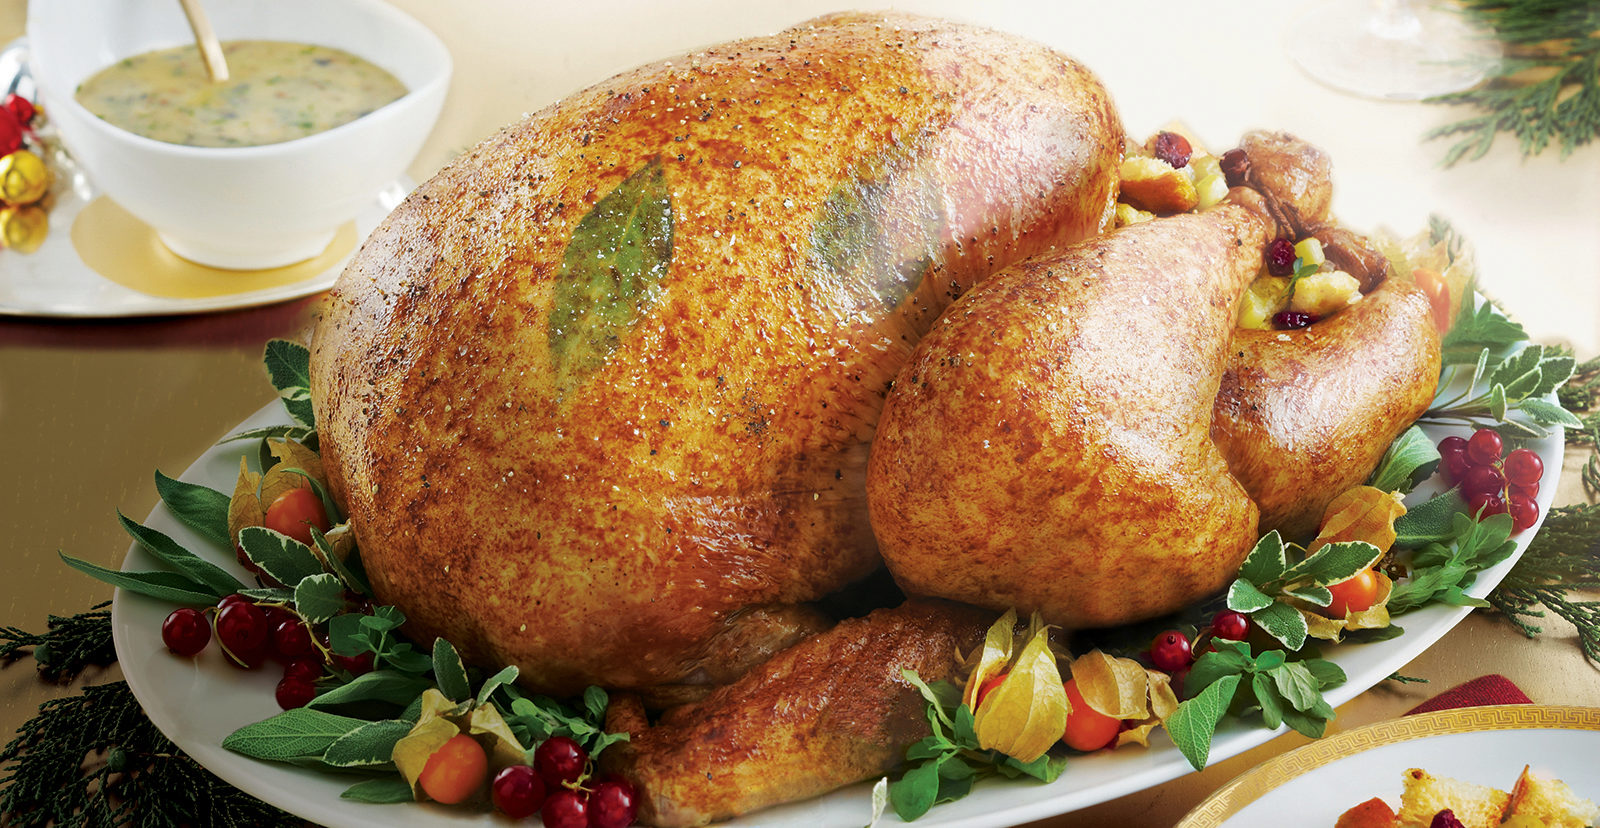 Read more about Perfect Roast Turkey with Cranberry Stuffing